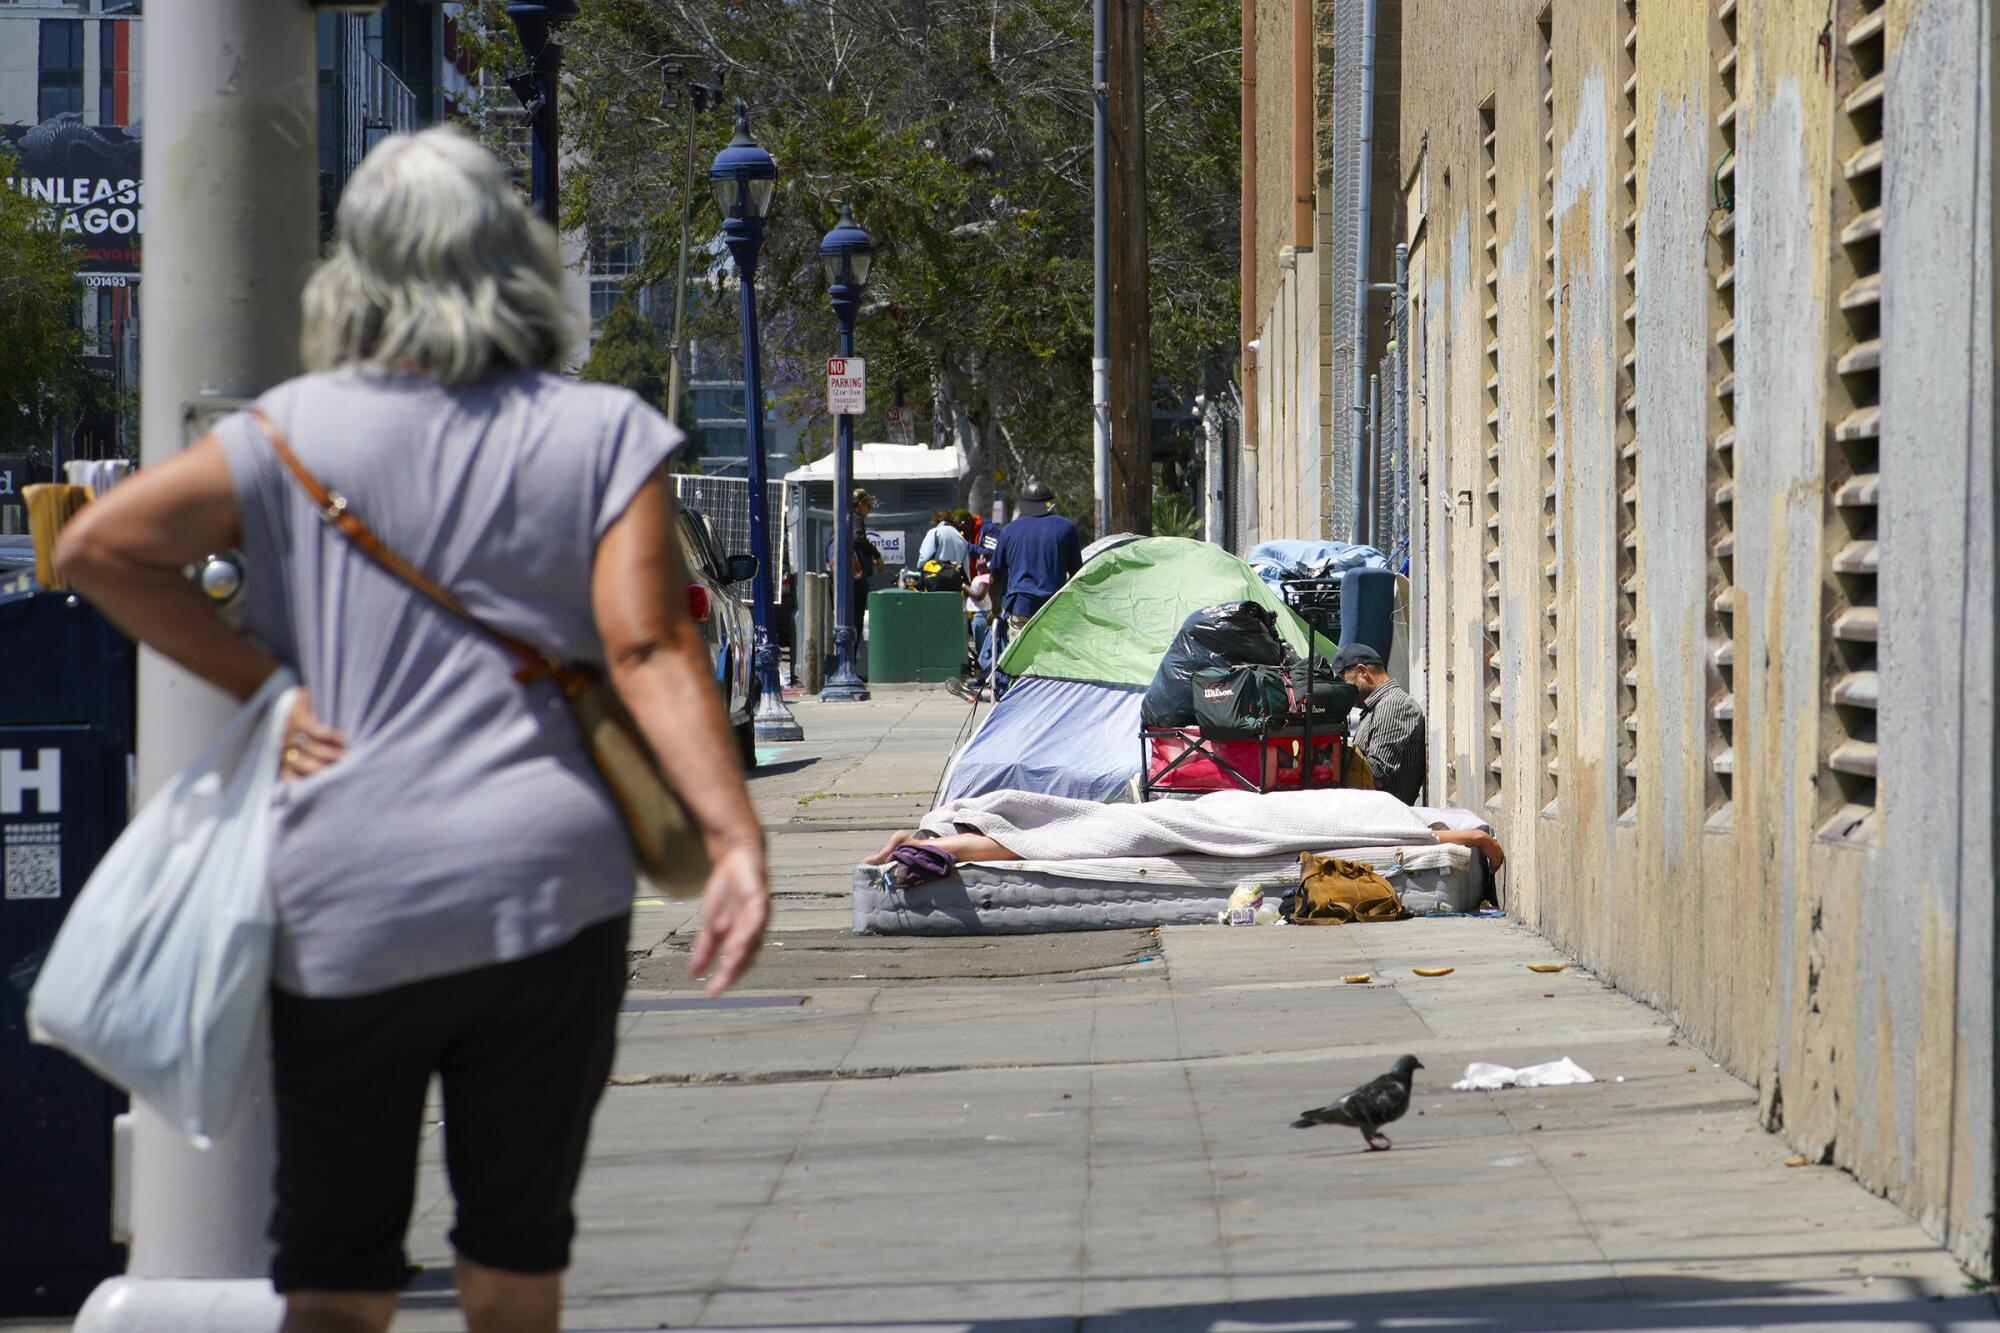 Several individual sleeping spots on 16th Street in San Diego.